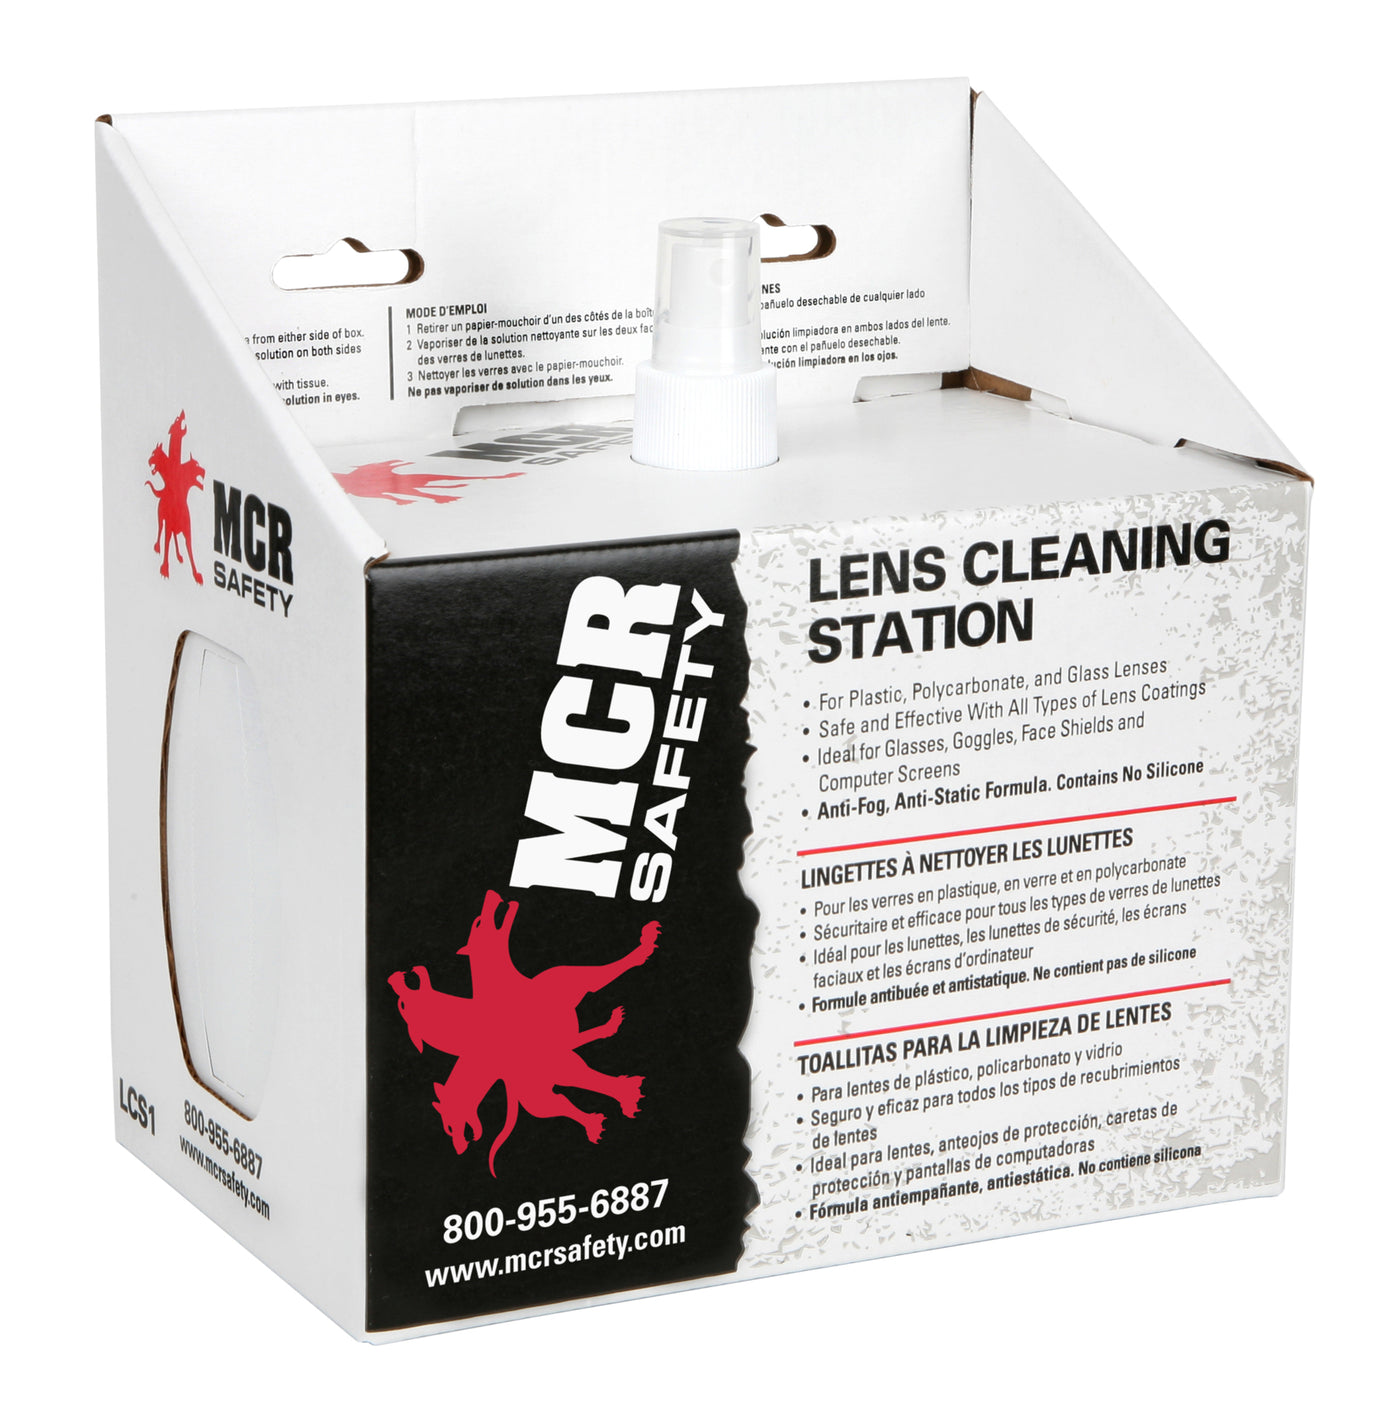 LCS1 - Lens Cleaning Station